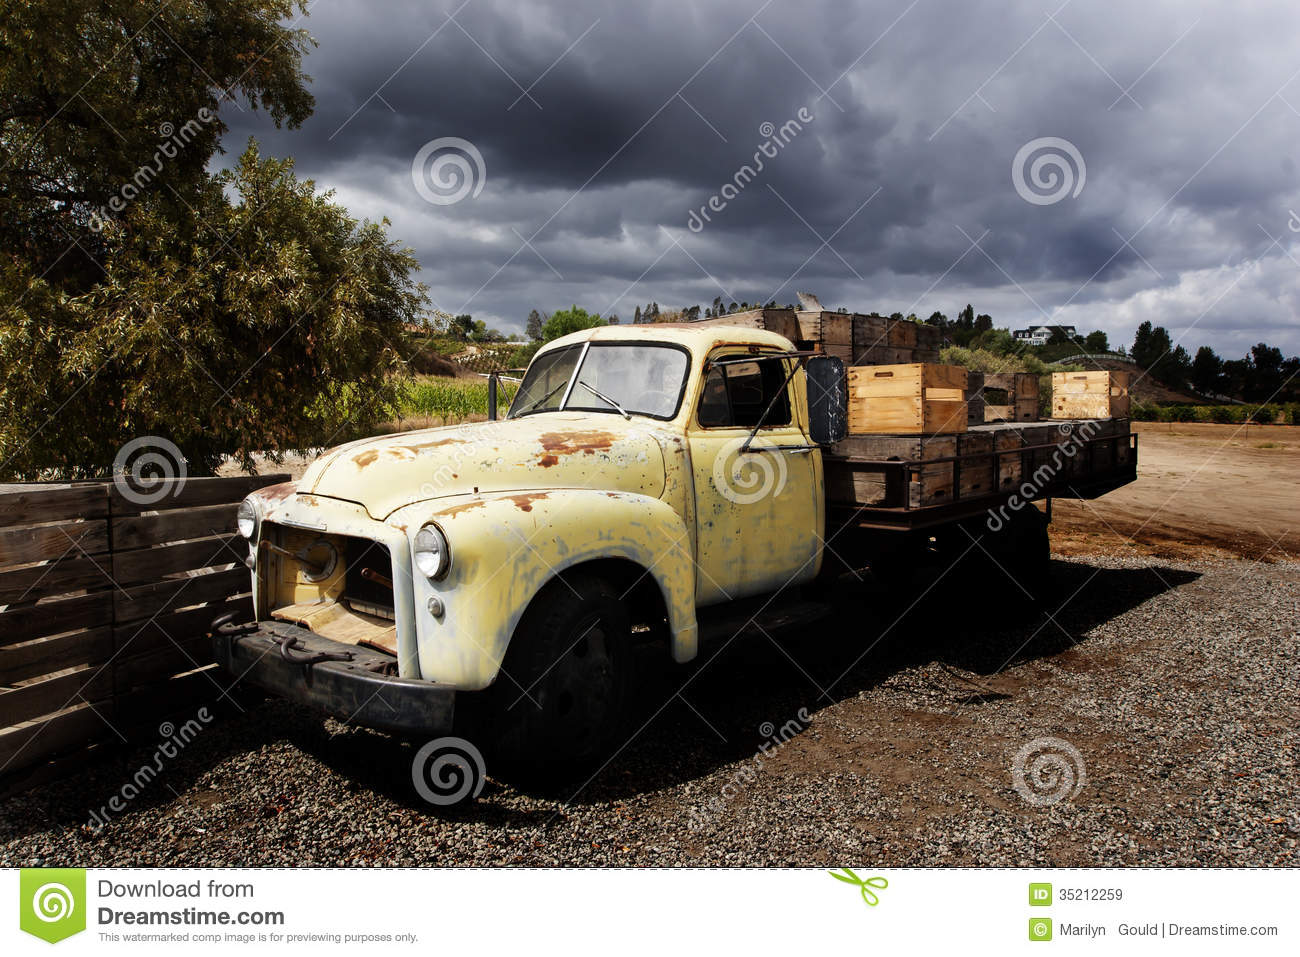 An Old Gmc Flatbed Truck With Faded Yellow Paint And Rust Spots